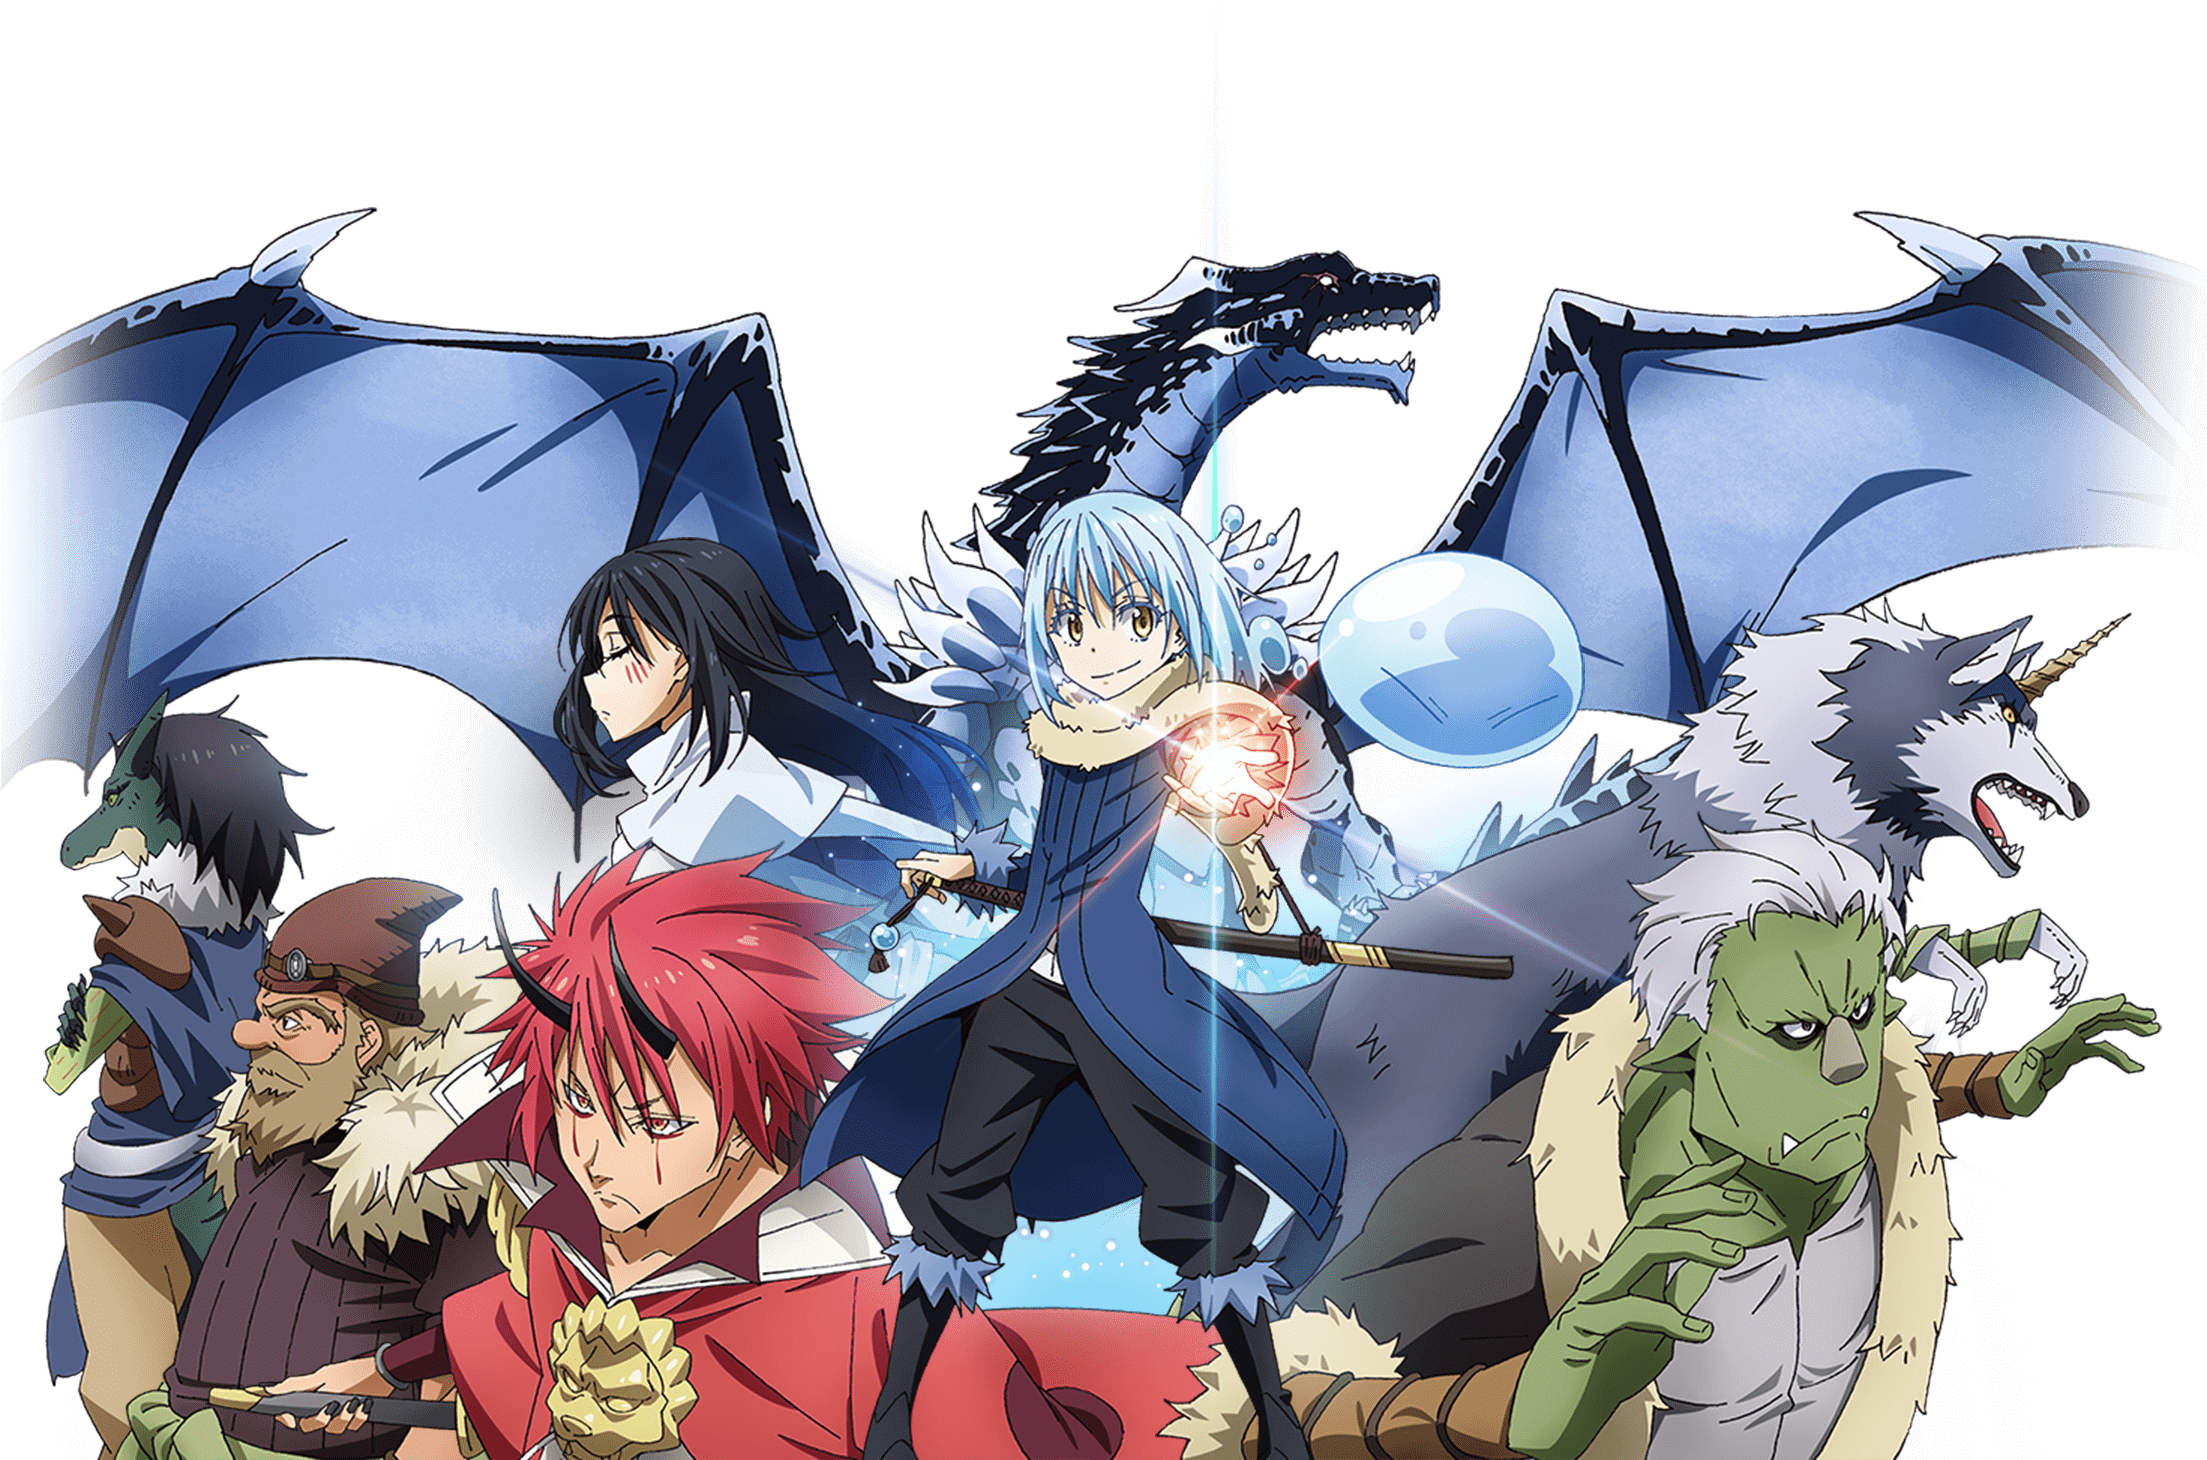 397167 wallpaper, that time i got reincarnated as a slime, anime,  characters, 4k, hd - Rare Gallery HD Wallpapers